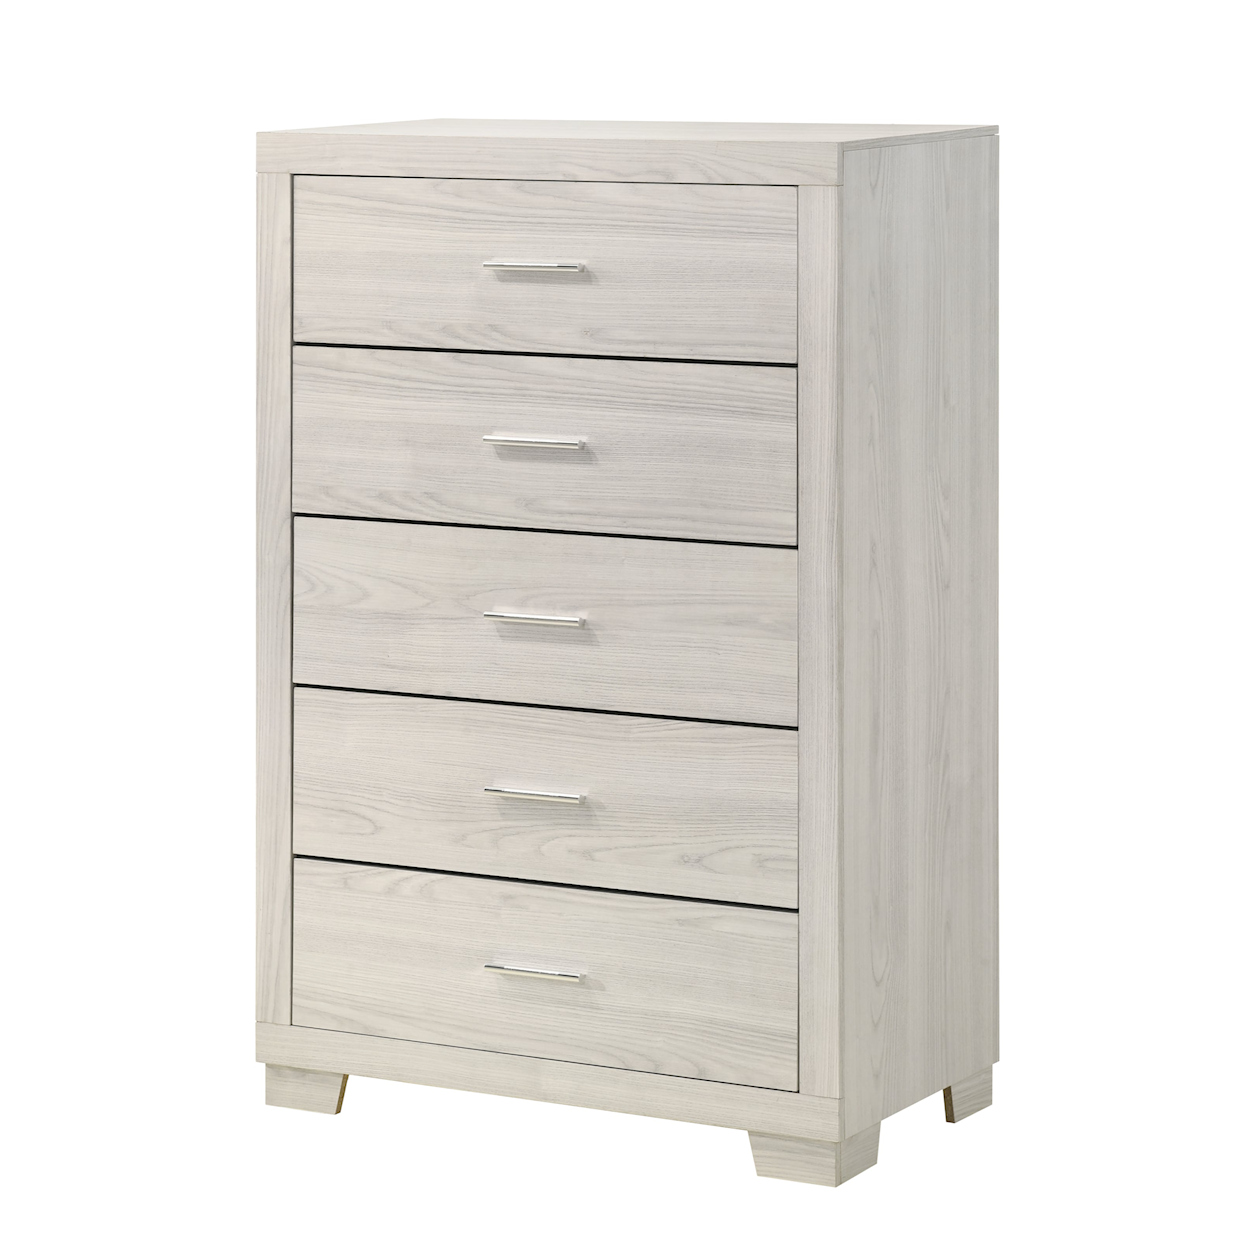 Alex's Furniture 8376A Chest W/ Full Extension Drawer Glides